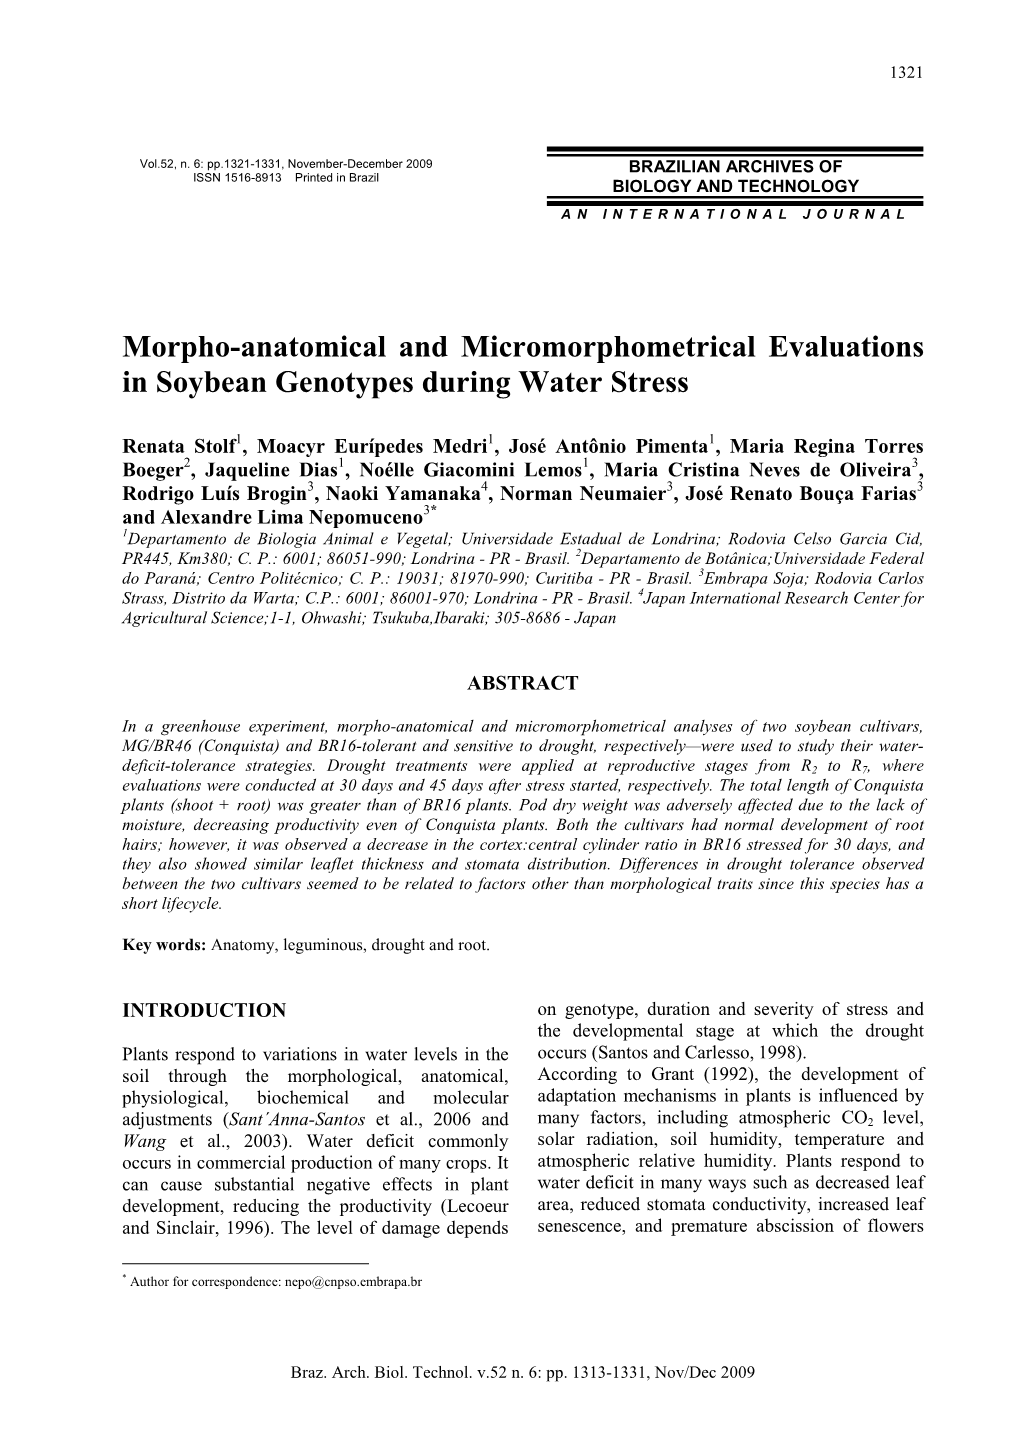 Morpho-Anatomical and Micromorphometrical Evaluations in Soybean Genotypes During Water Stress